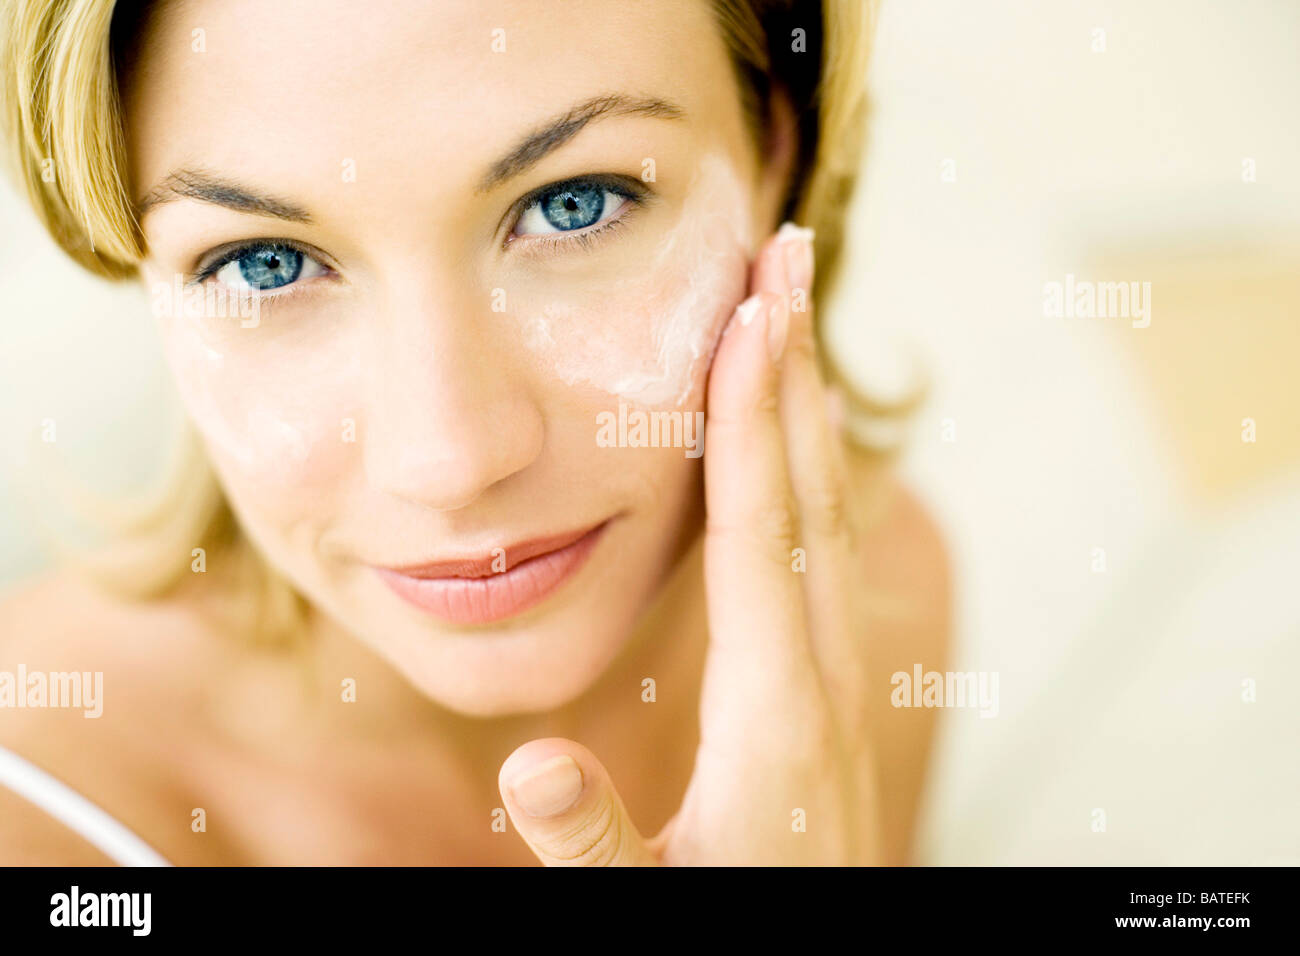 Anti-wrinkle cream. Woman with dots of cream on the wrinkles around her eye. Stock Photo